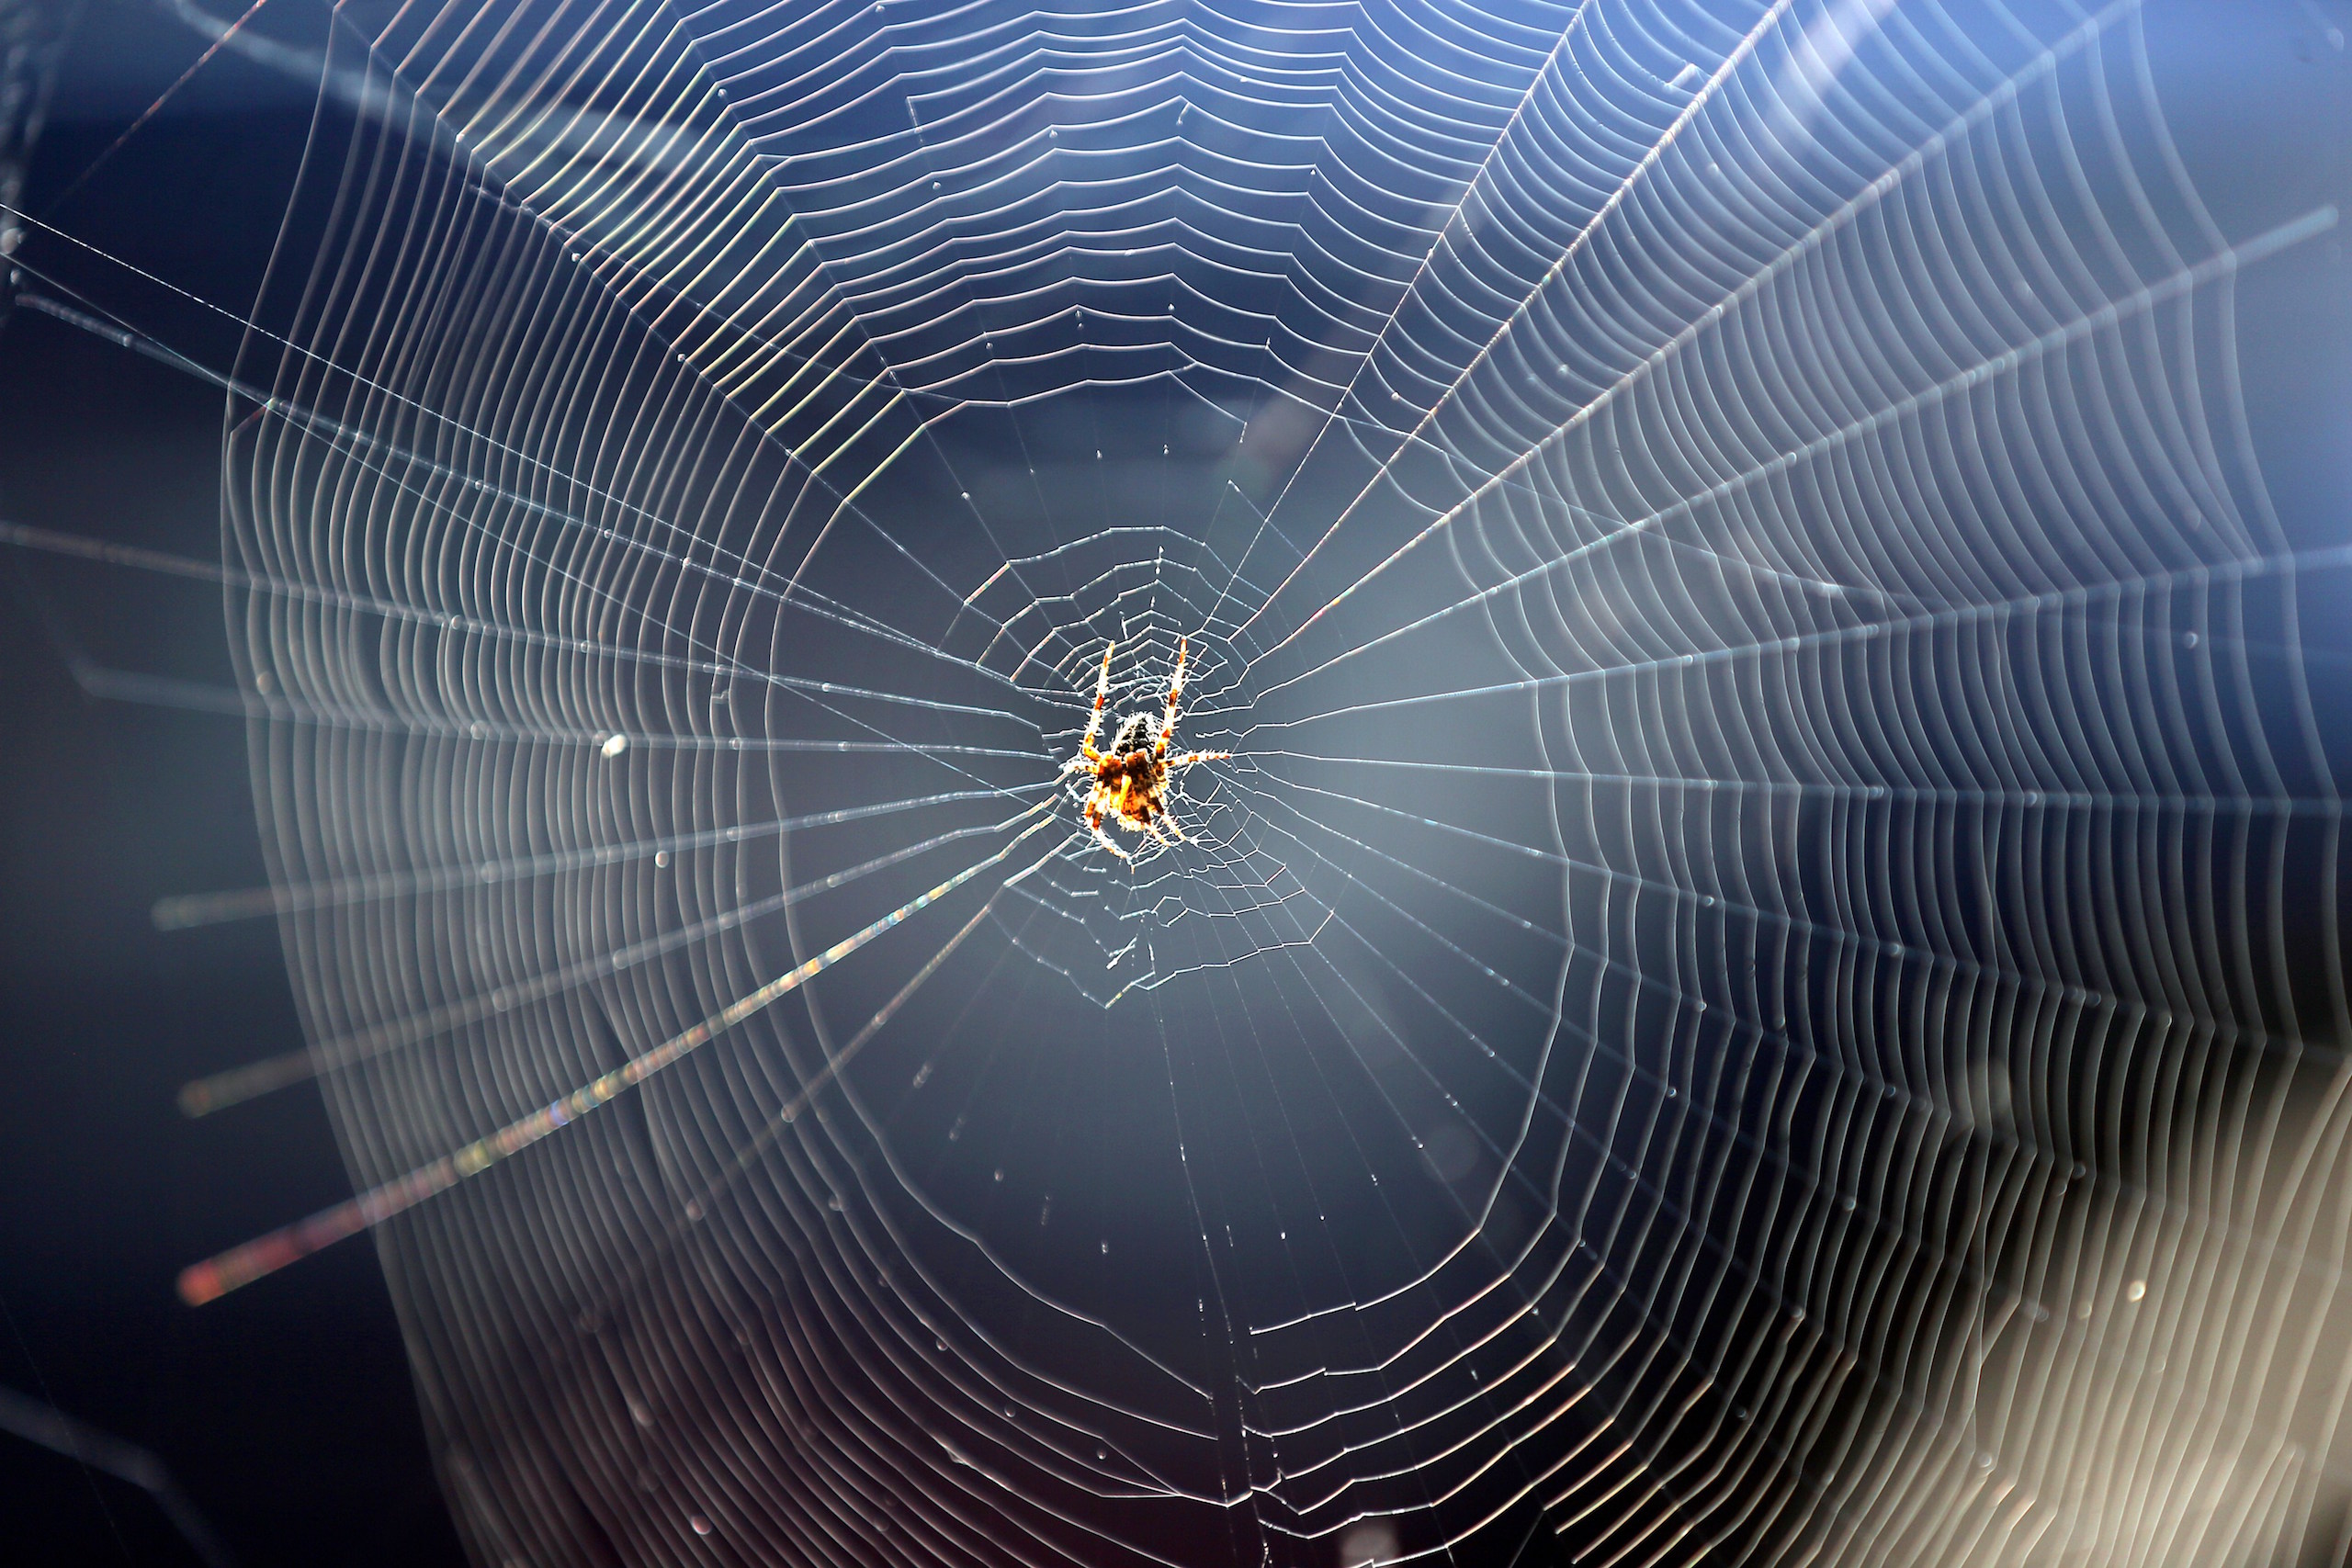 The Man-Made Spider Webs Created by Scientists